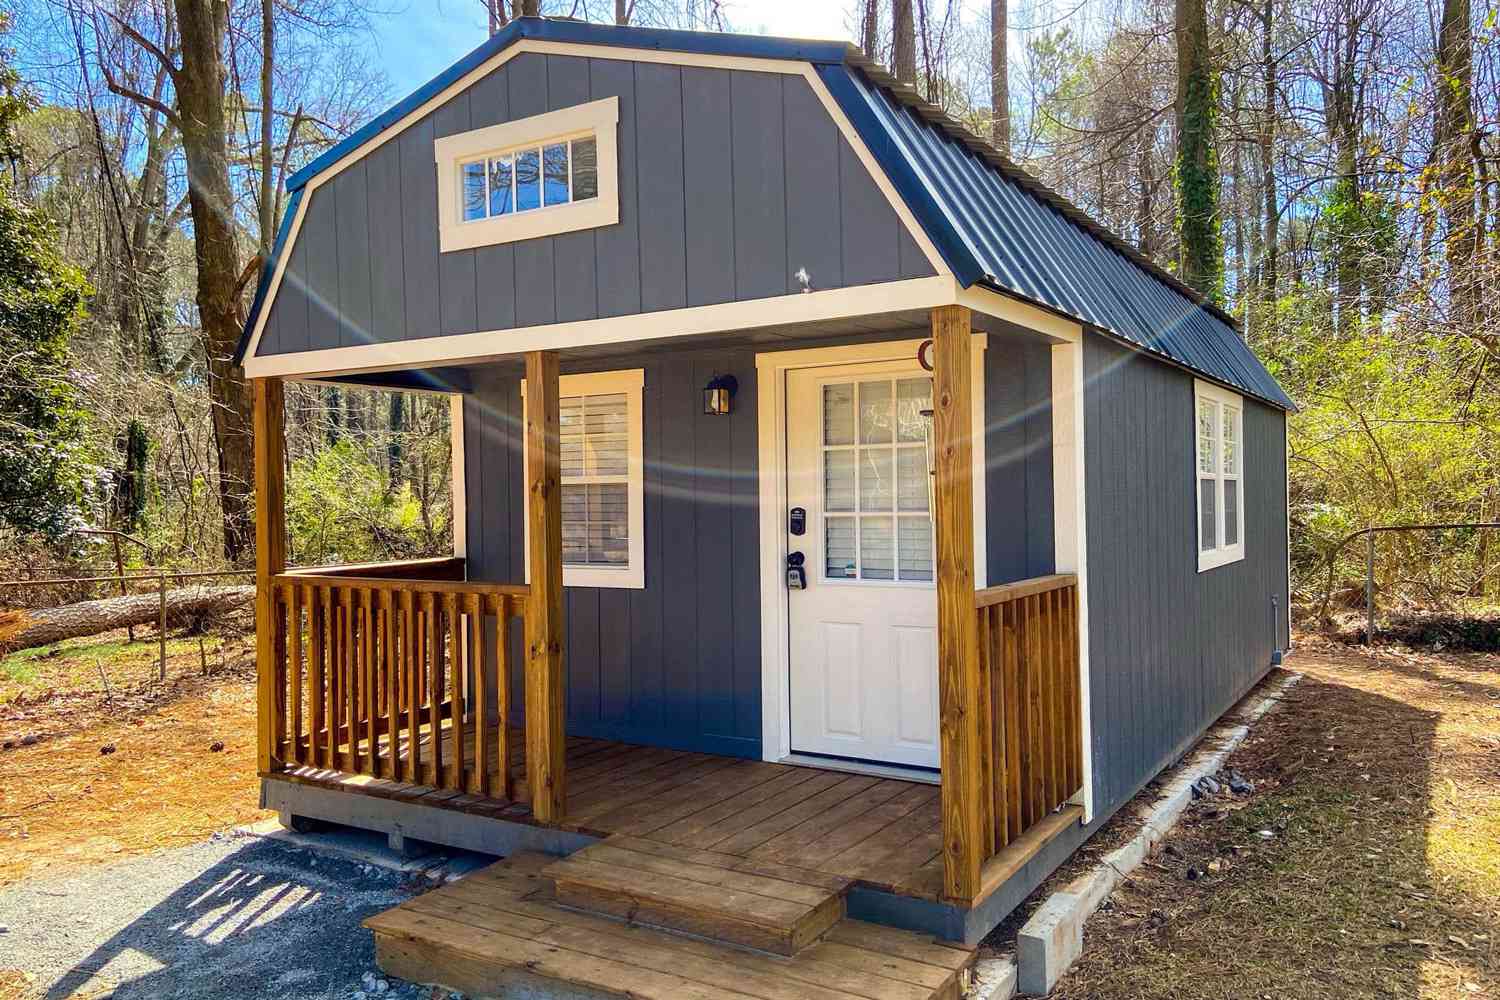 What It’s Really Like Living in a Tiny Home, from an Expert Whos Done It [Video]